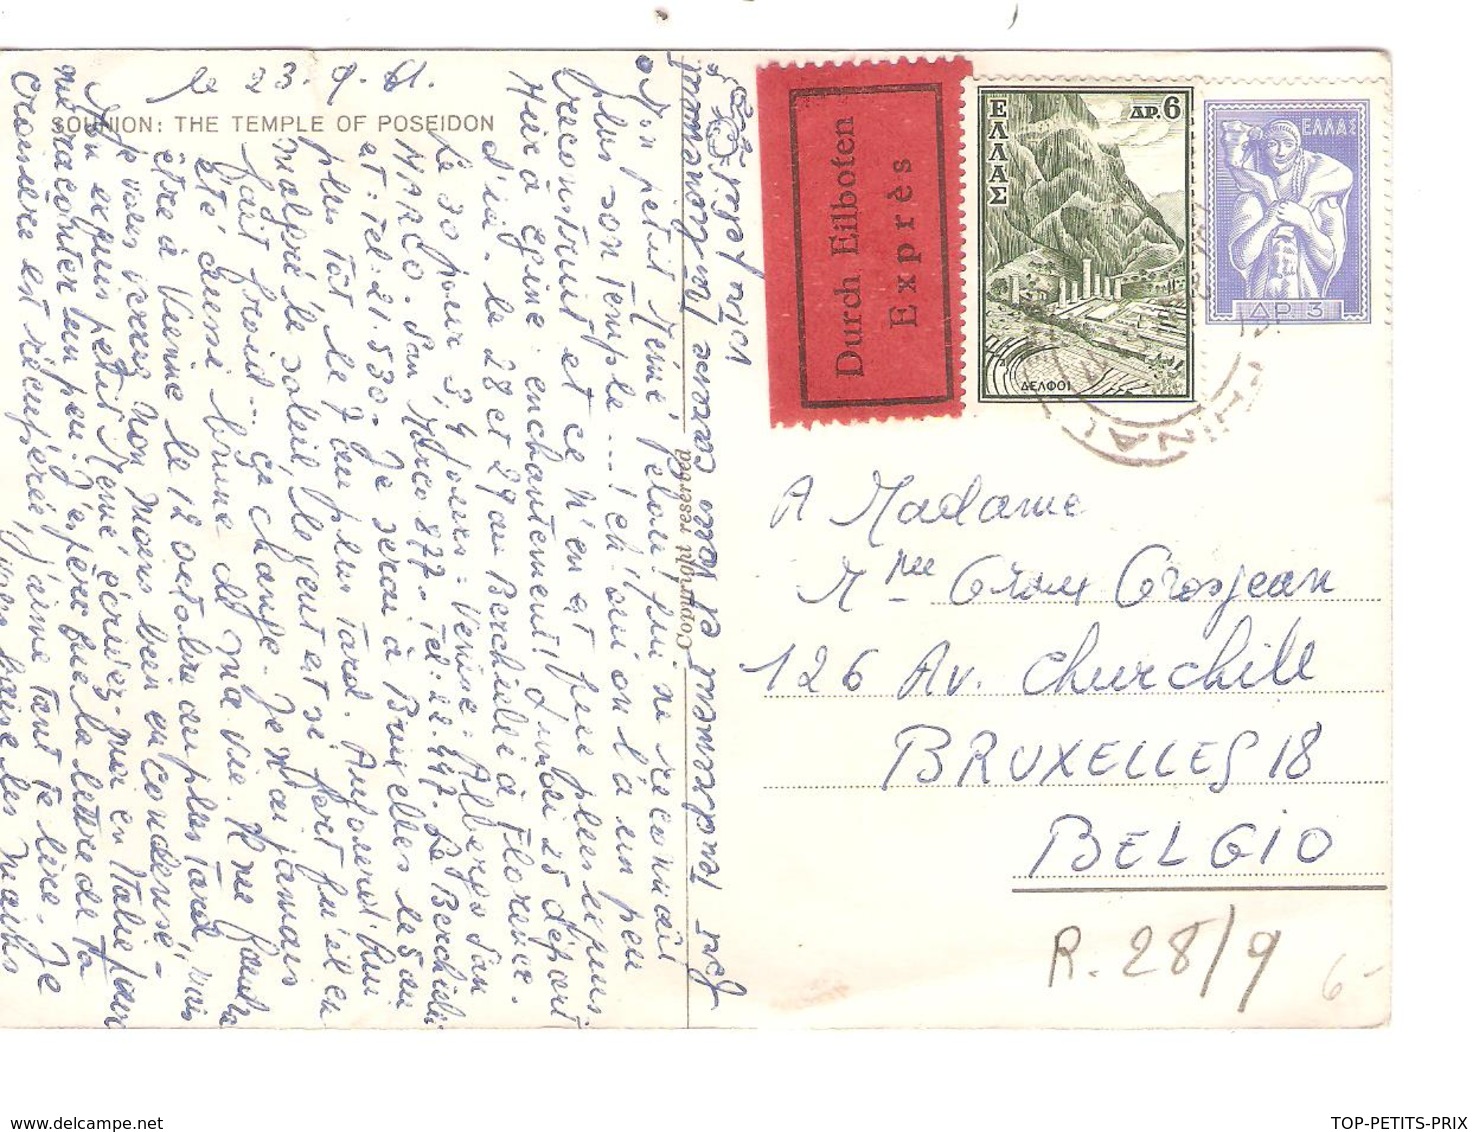 REF1204/ Greece Express PC (The Temple Of Poseidon) 1961 > Belgium Brussels Arrival Cancellation 26/9/61 Brussels - Poststempel - Freistempel